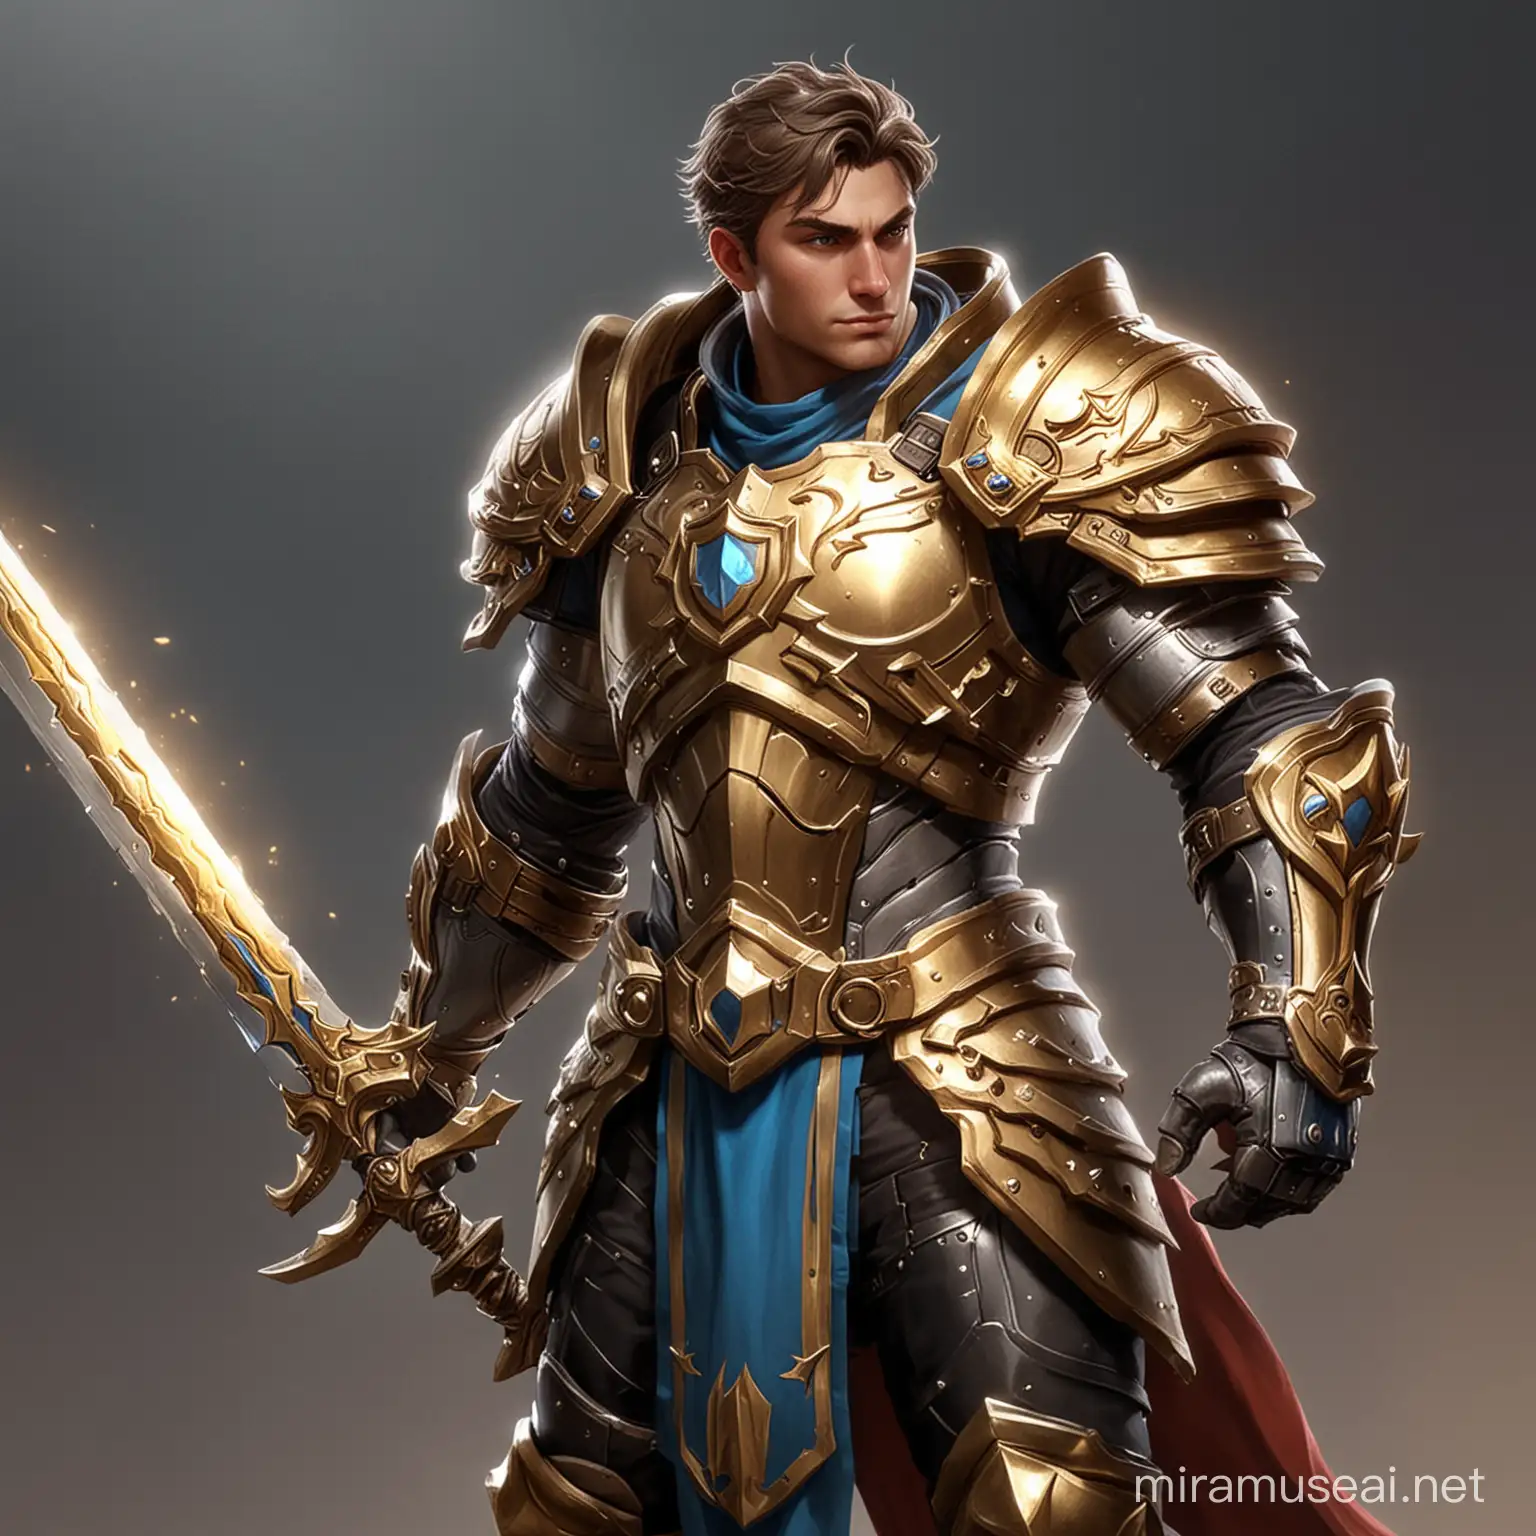 show me garen from league of legends
make him have short curly light brown hair
he is wearing a holy plate armor like paladins from world of warcraft universe
he has a big 2 handed sword that has a bright holy gold shine